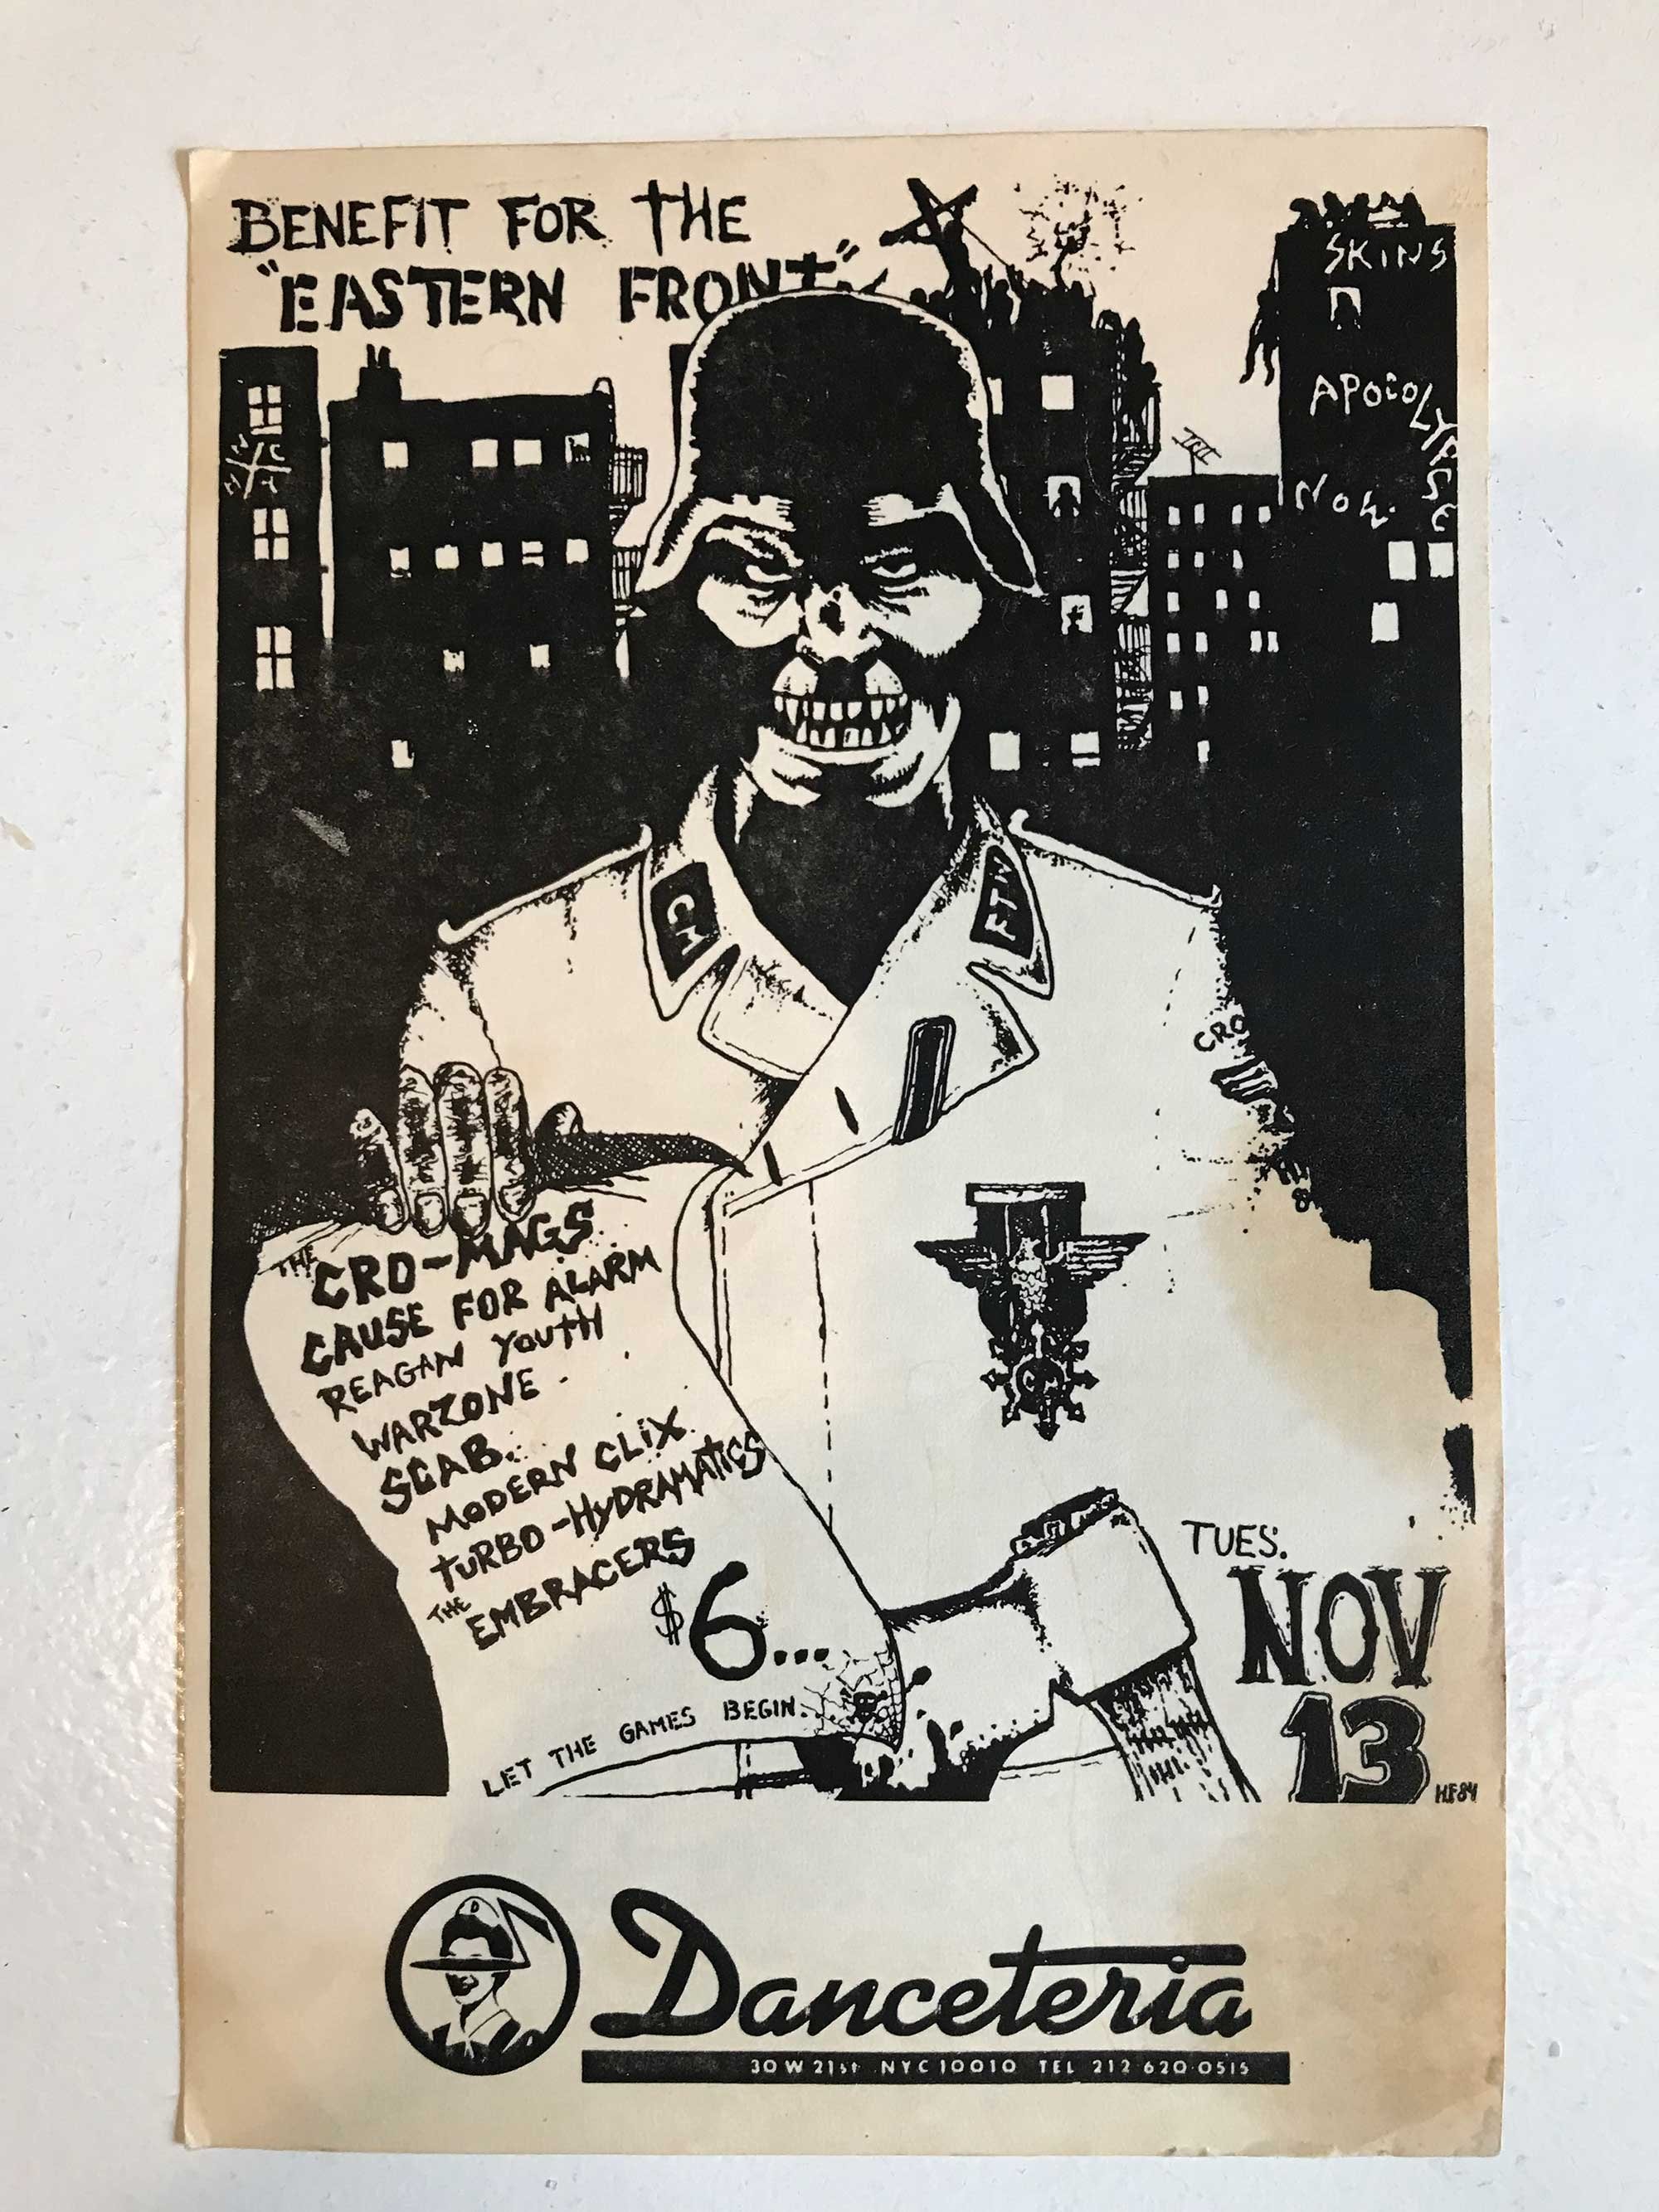  (Front) Show Card for Embracers gig, Benefit for the “Eastern Front”, Danceteria, Downtown NYC, 1983 